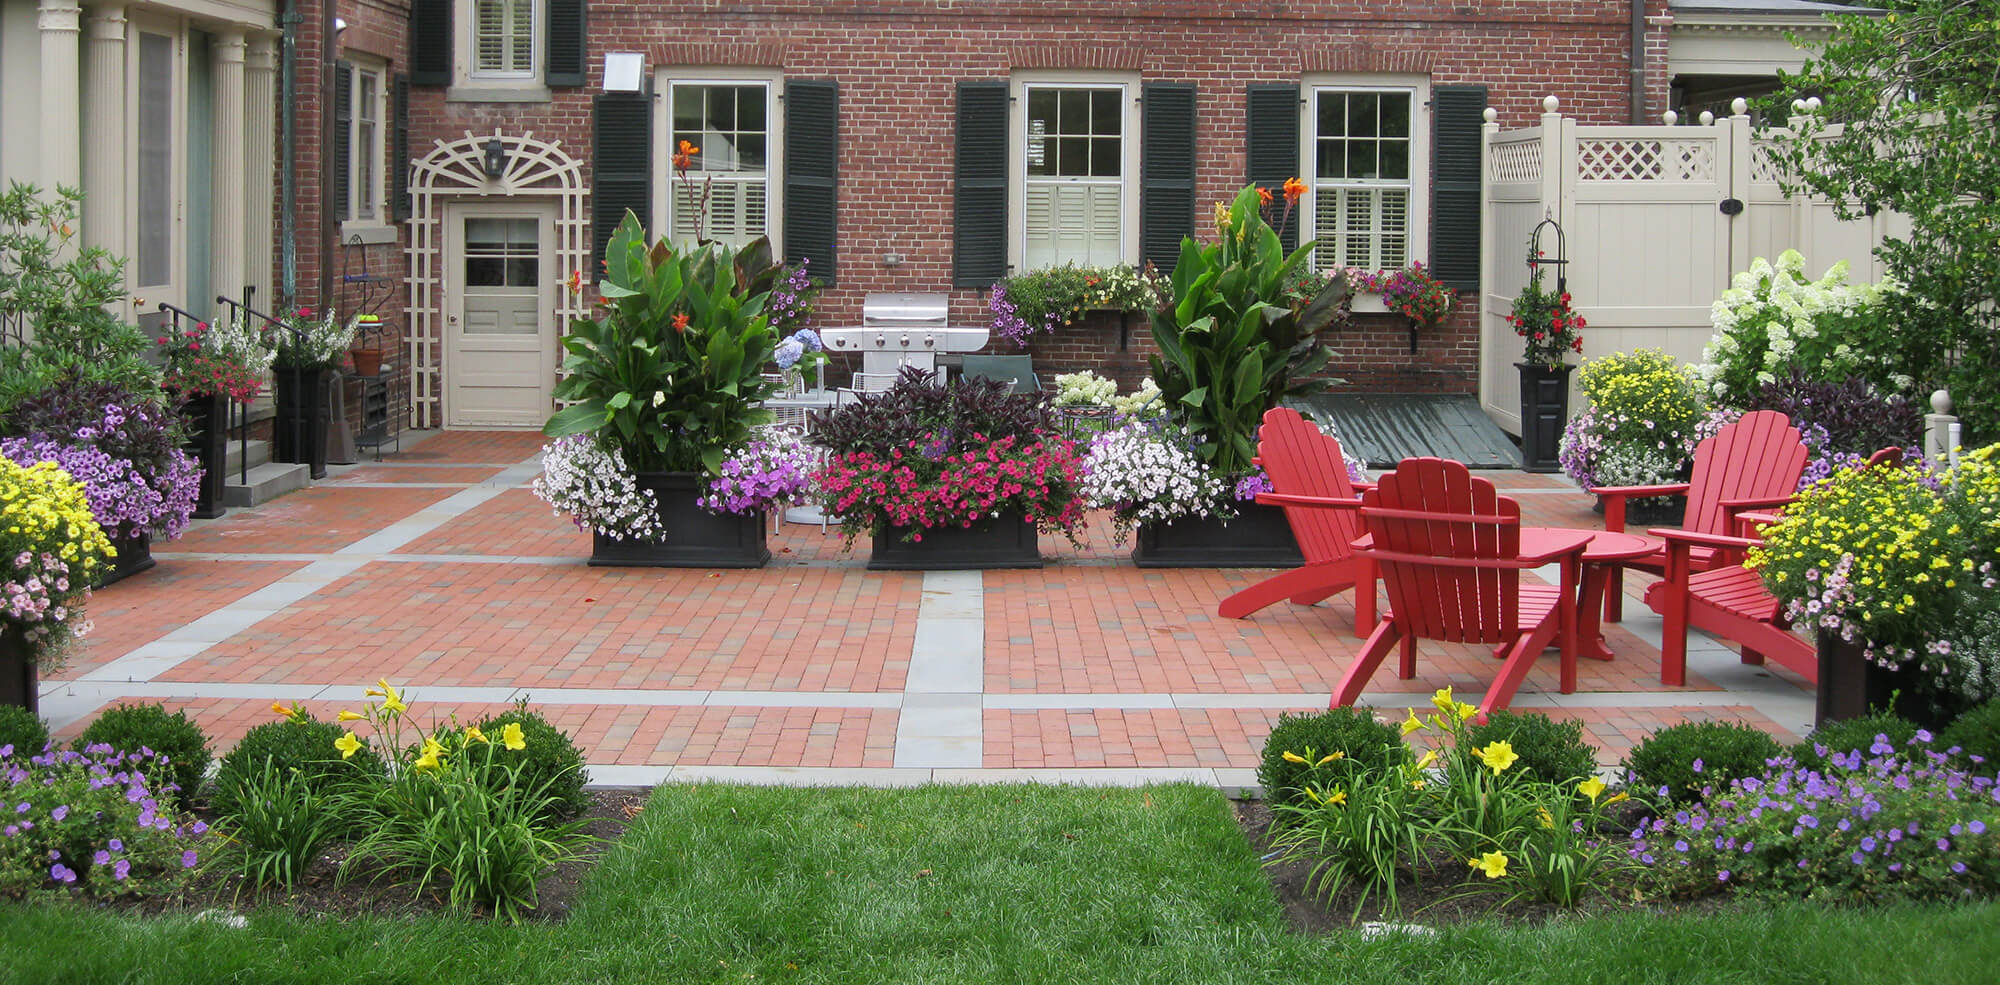 Vermont Landscaping Design, S D Landscaping Vermont South